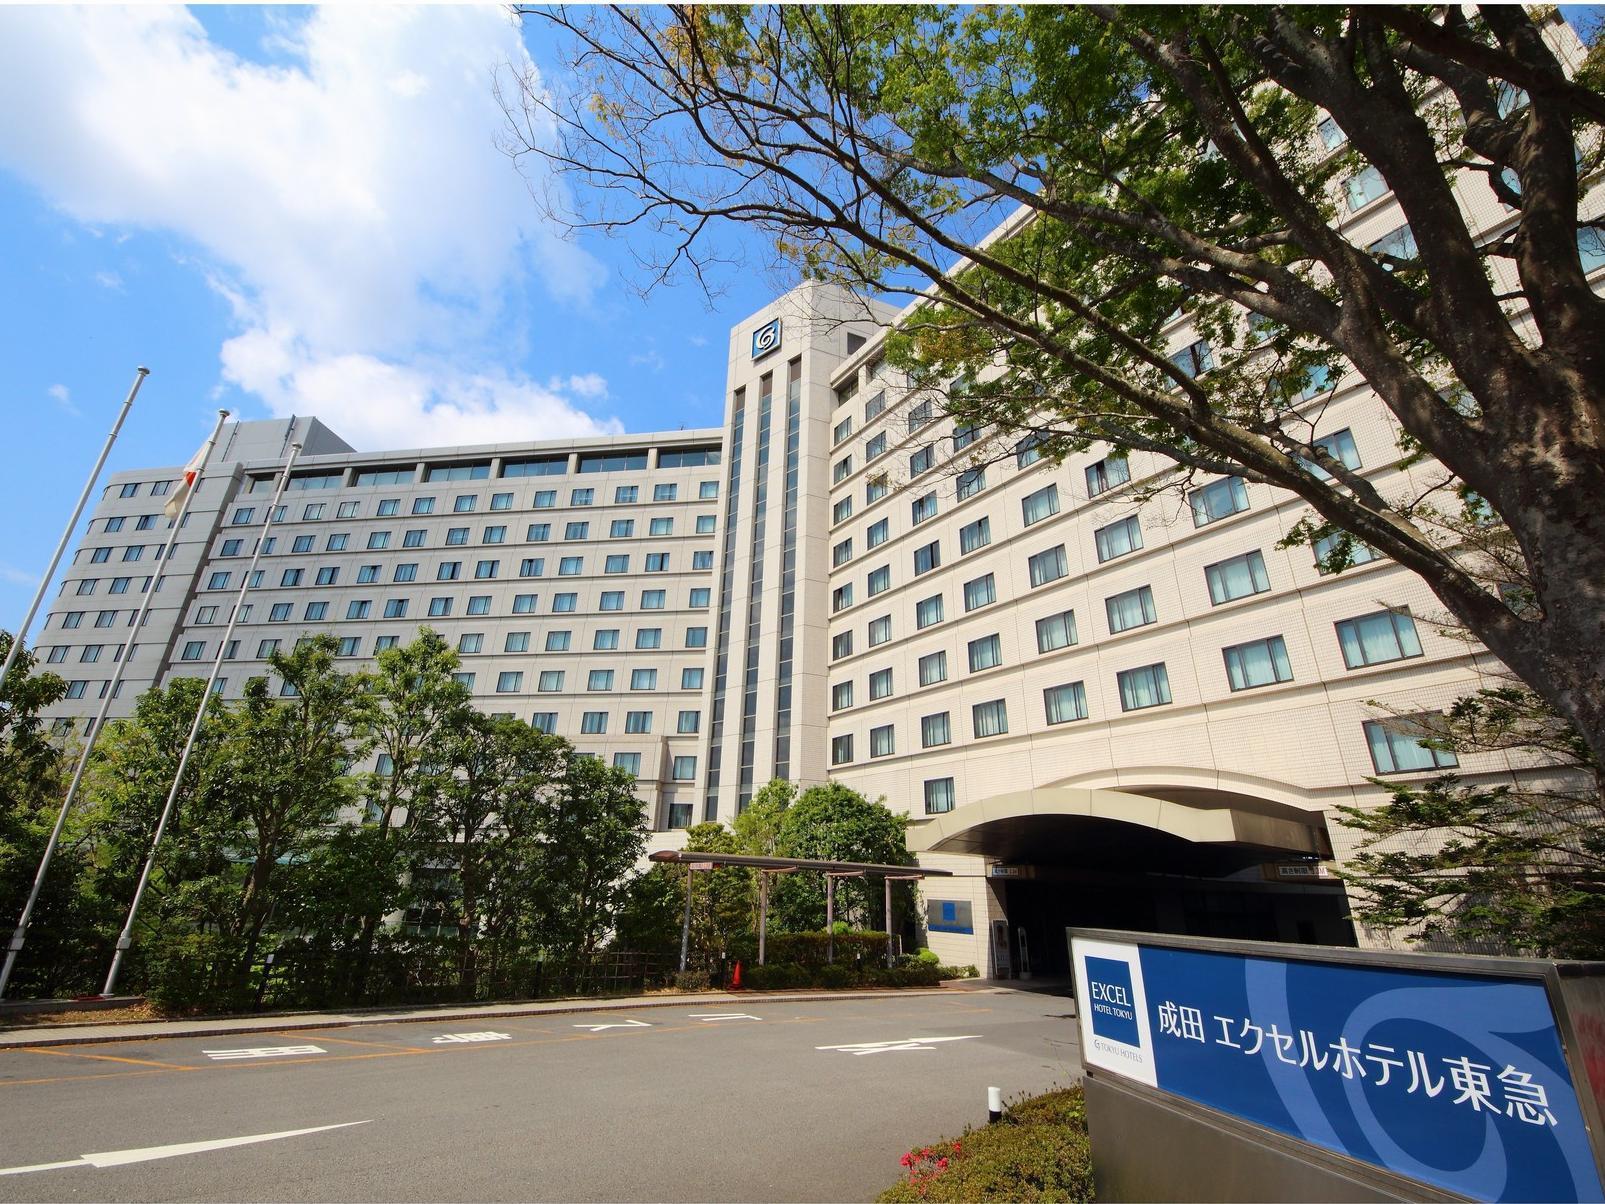 Narita Excel Hotel Tokyu Japan FAQ 2016, What facilities are there in Narita Excel Hotel Tokyu Japan 2016, What Languages Spoken are Supported in Narita Excel Hotel Tokyu Japan 2016, Which payment cards are accepted in Narita Excel Hotel Tokyu Japan , Japan Narita Excel Hotel Tokyu room facilities and services Q&A 2016, Japan Narita Excel Hotel Tokyu online booking services 2016, Japan Narita Excel Hotel Tokyu address 2016, Japan Narita Excel Hotel Tokyu telephone number 2016,Japan Narita Excel Hotel Tokyu map 2016, Japan Narita Excel Hotel Tokyu traffic guide 2016, how to go Japan Narita Excel Hotel Tokyu, Japan Narita Excel Hotel Tokyu booking online 2016, Japan Narita Excel Hotel Tokyu room types 2016.